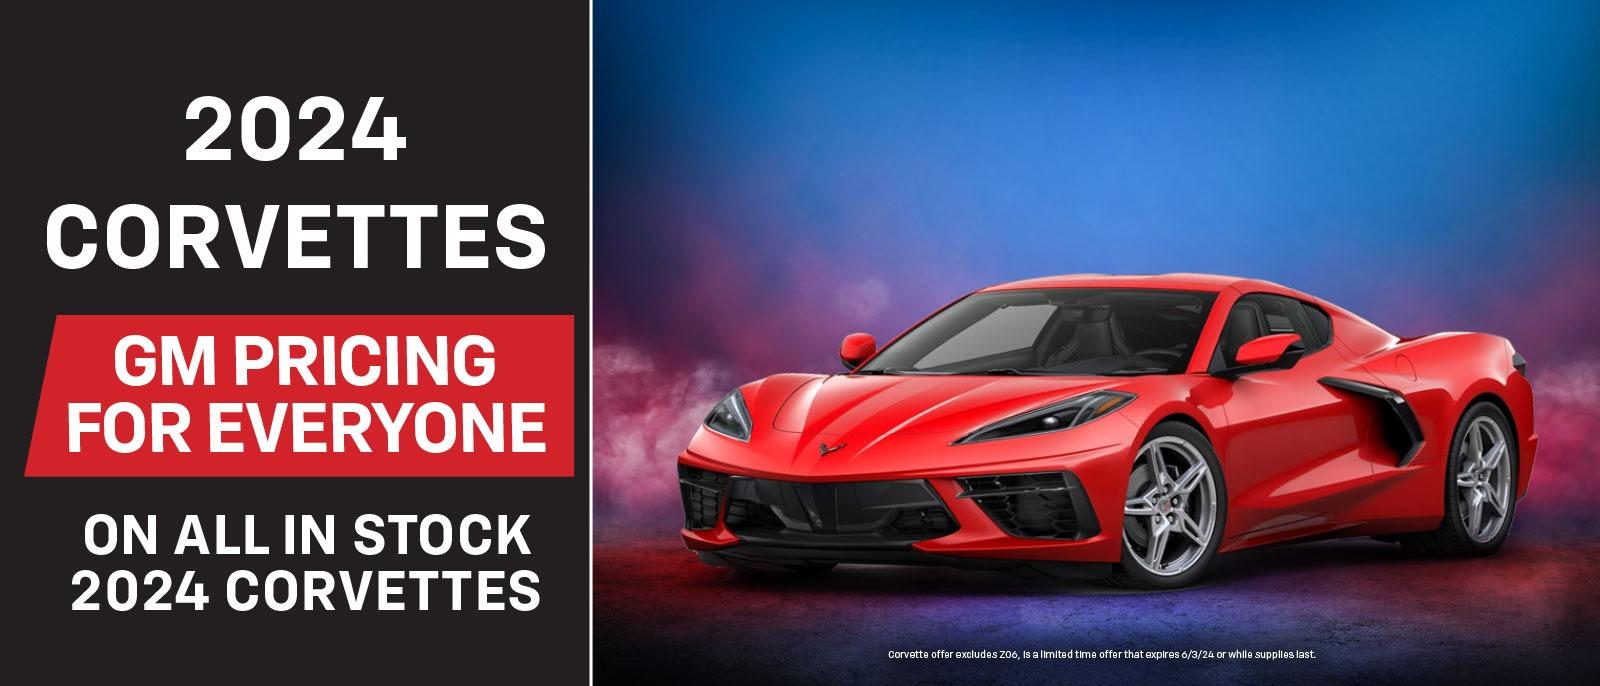 2024 Corvettes
GM pricing for everyone
On all in stock 2024 Corvettes